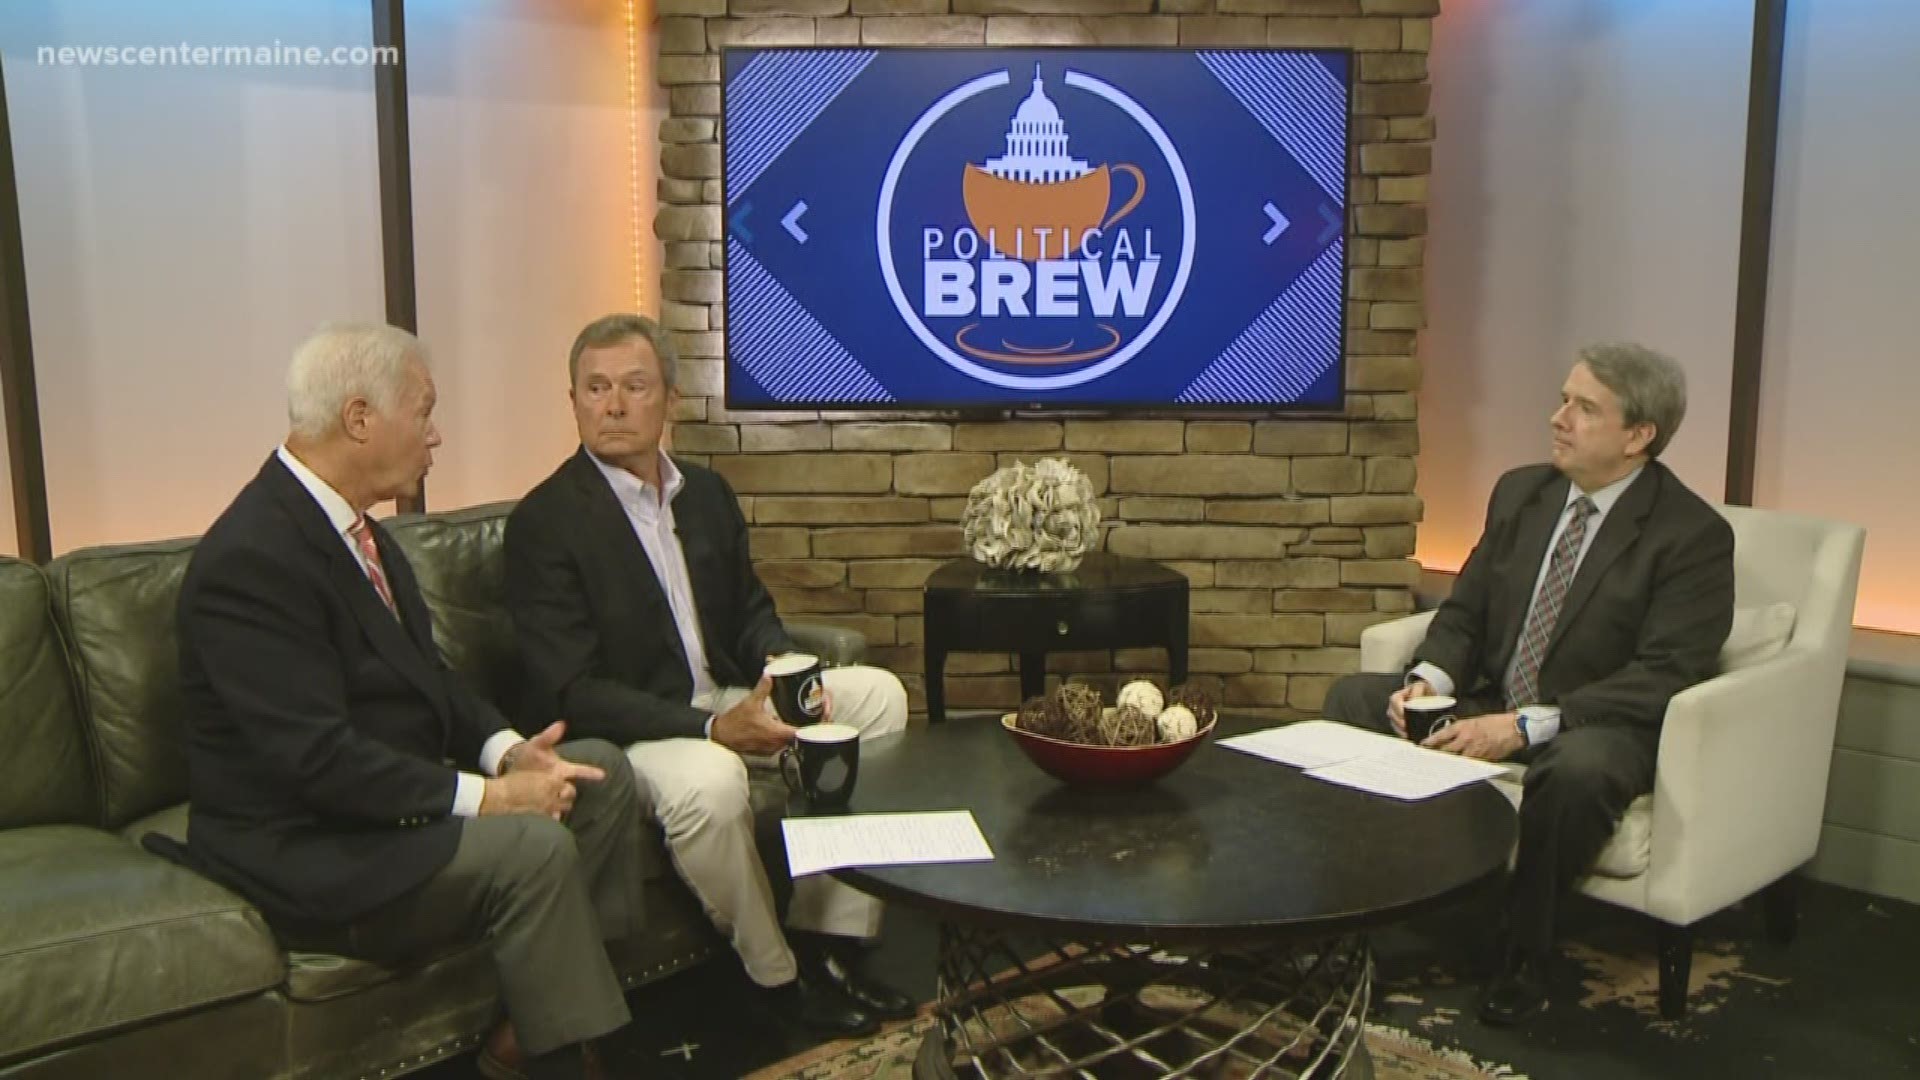 NEWS CENTER Maine's analysts sit down with Pat Callaghan to discuss the week in politics